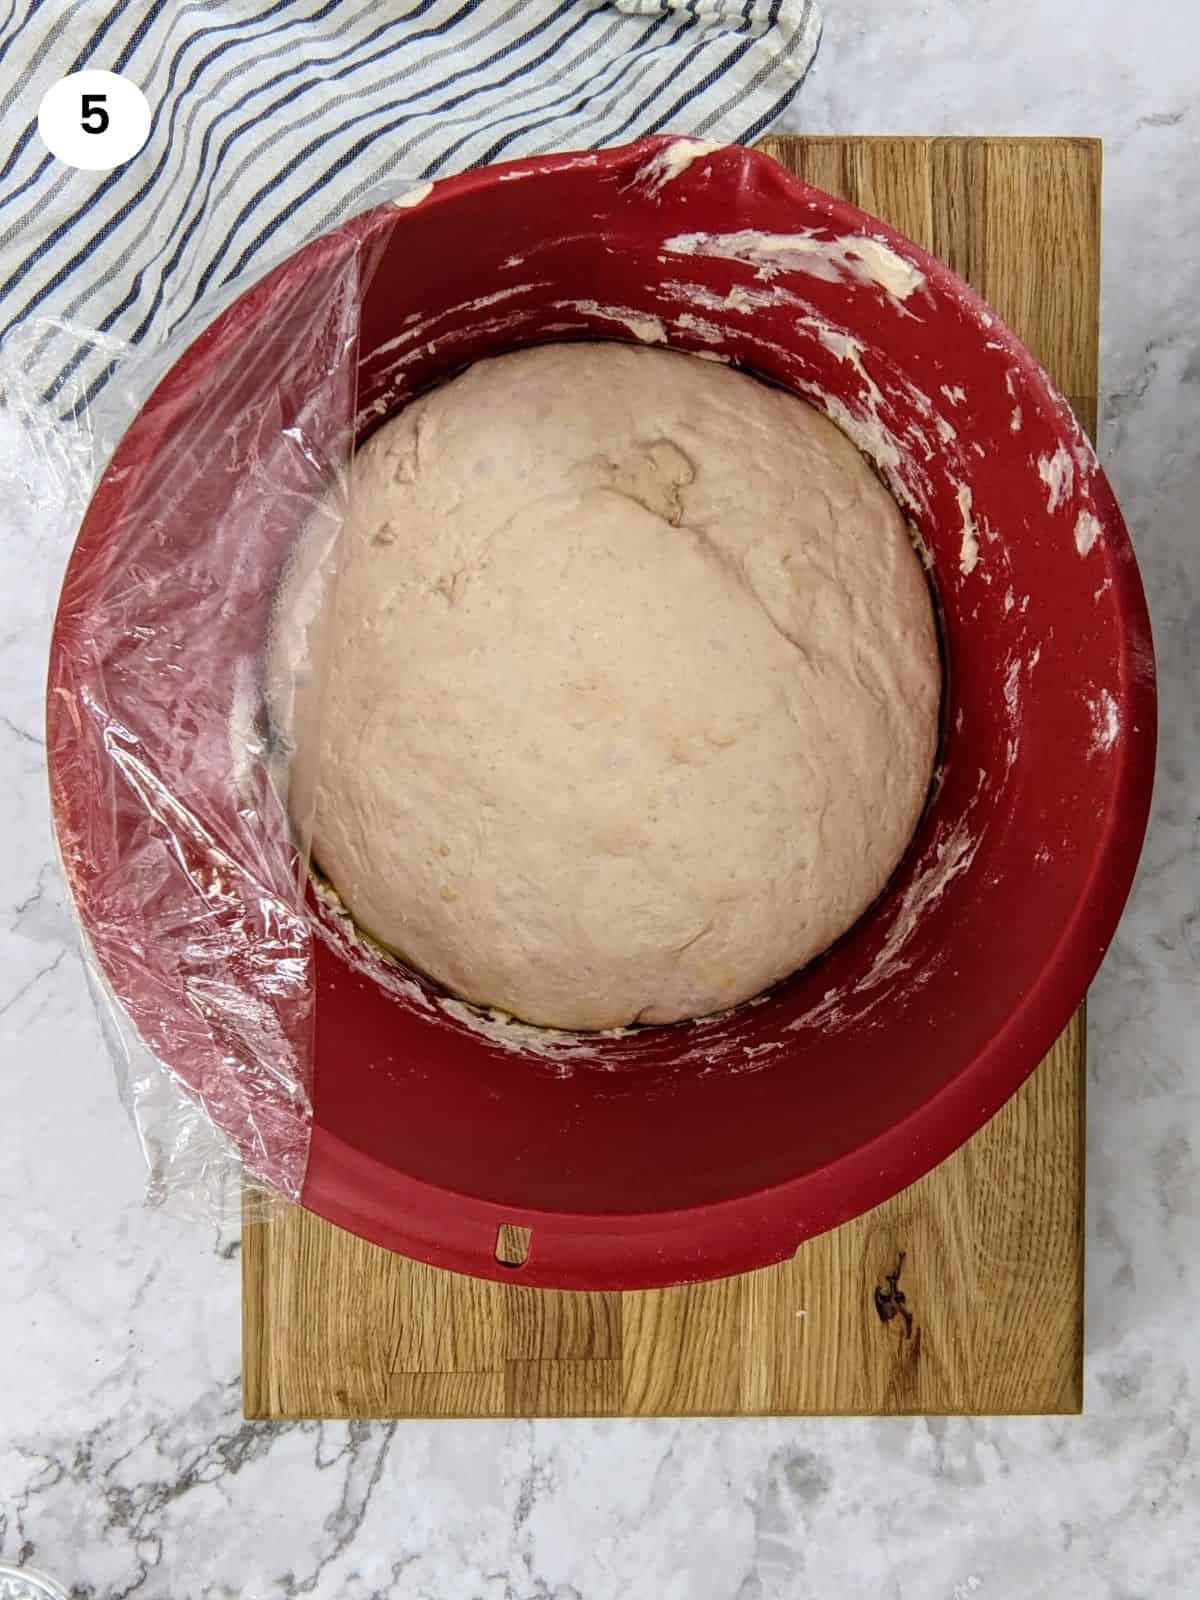 Dough after it has risen and double in size